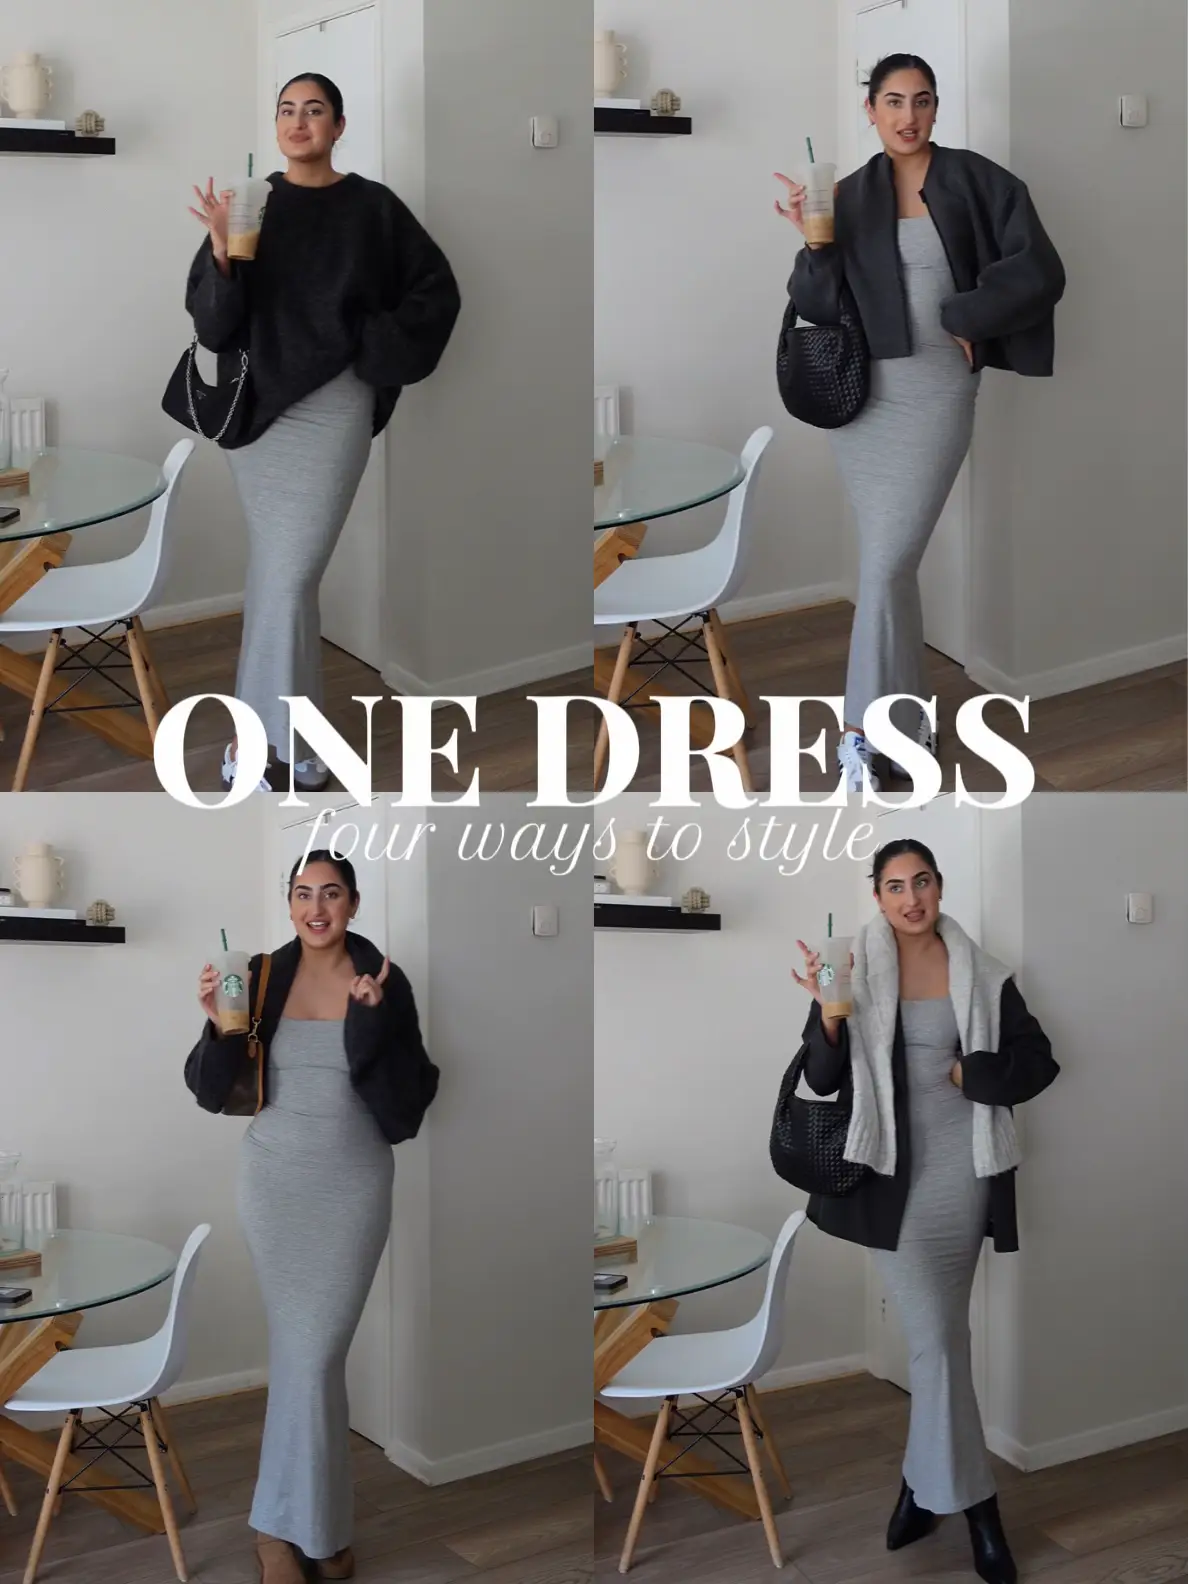 PLUS SIZE ALL BLACK DATE NIGHT OUTFIT IDEA, Gallery posted by  TraecChristine